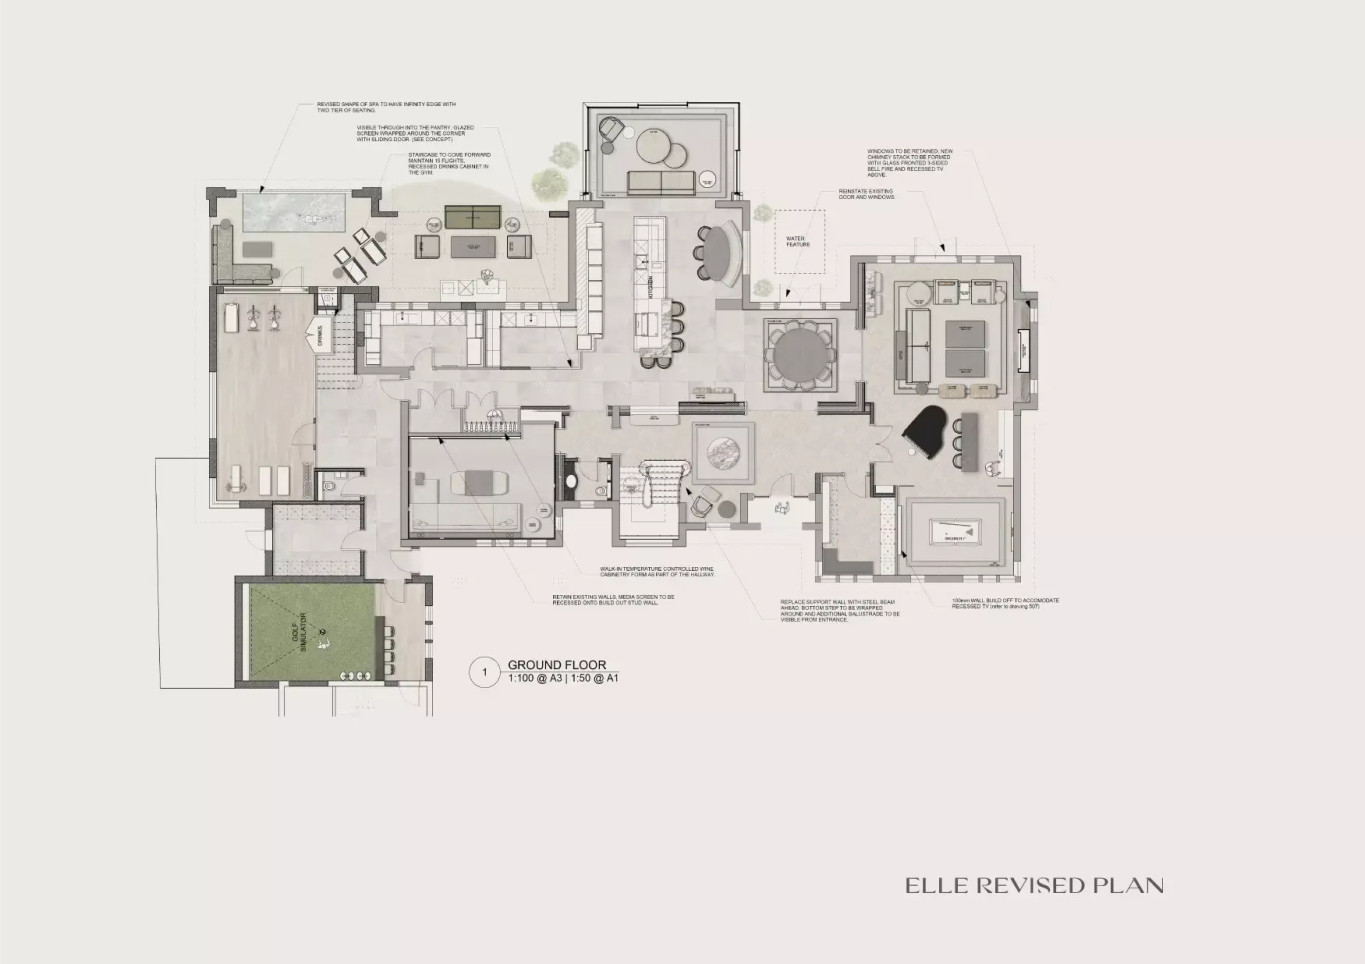 Architect Plan - After